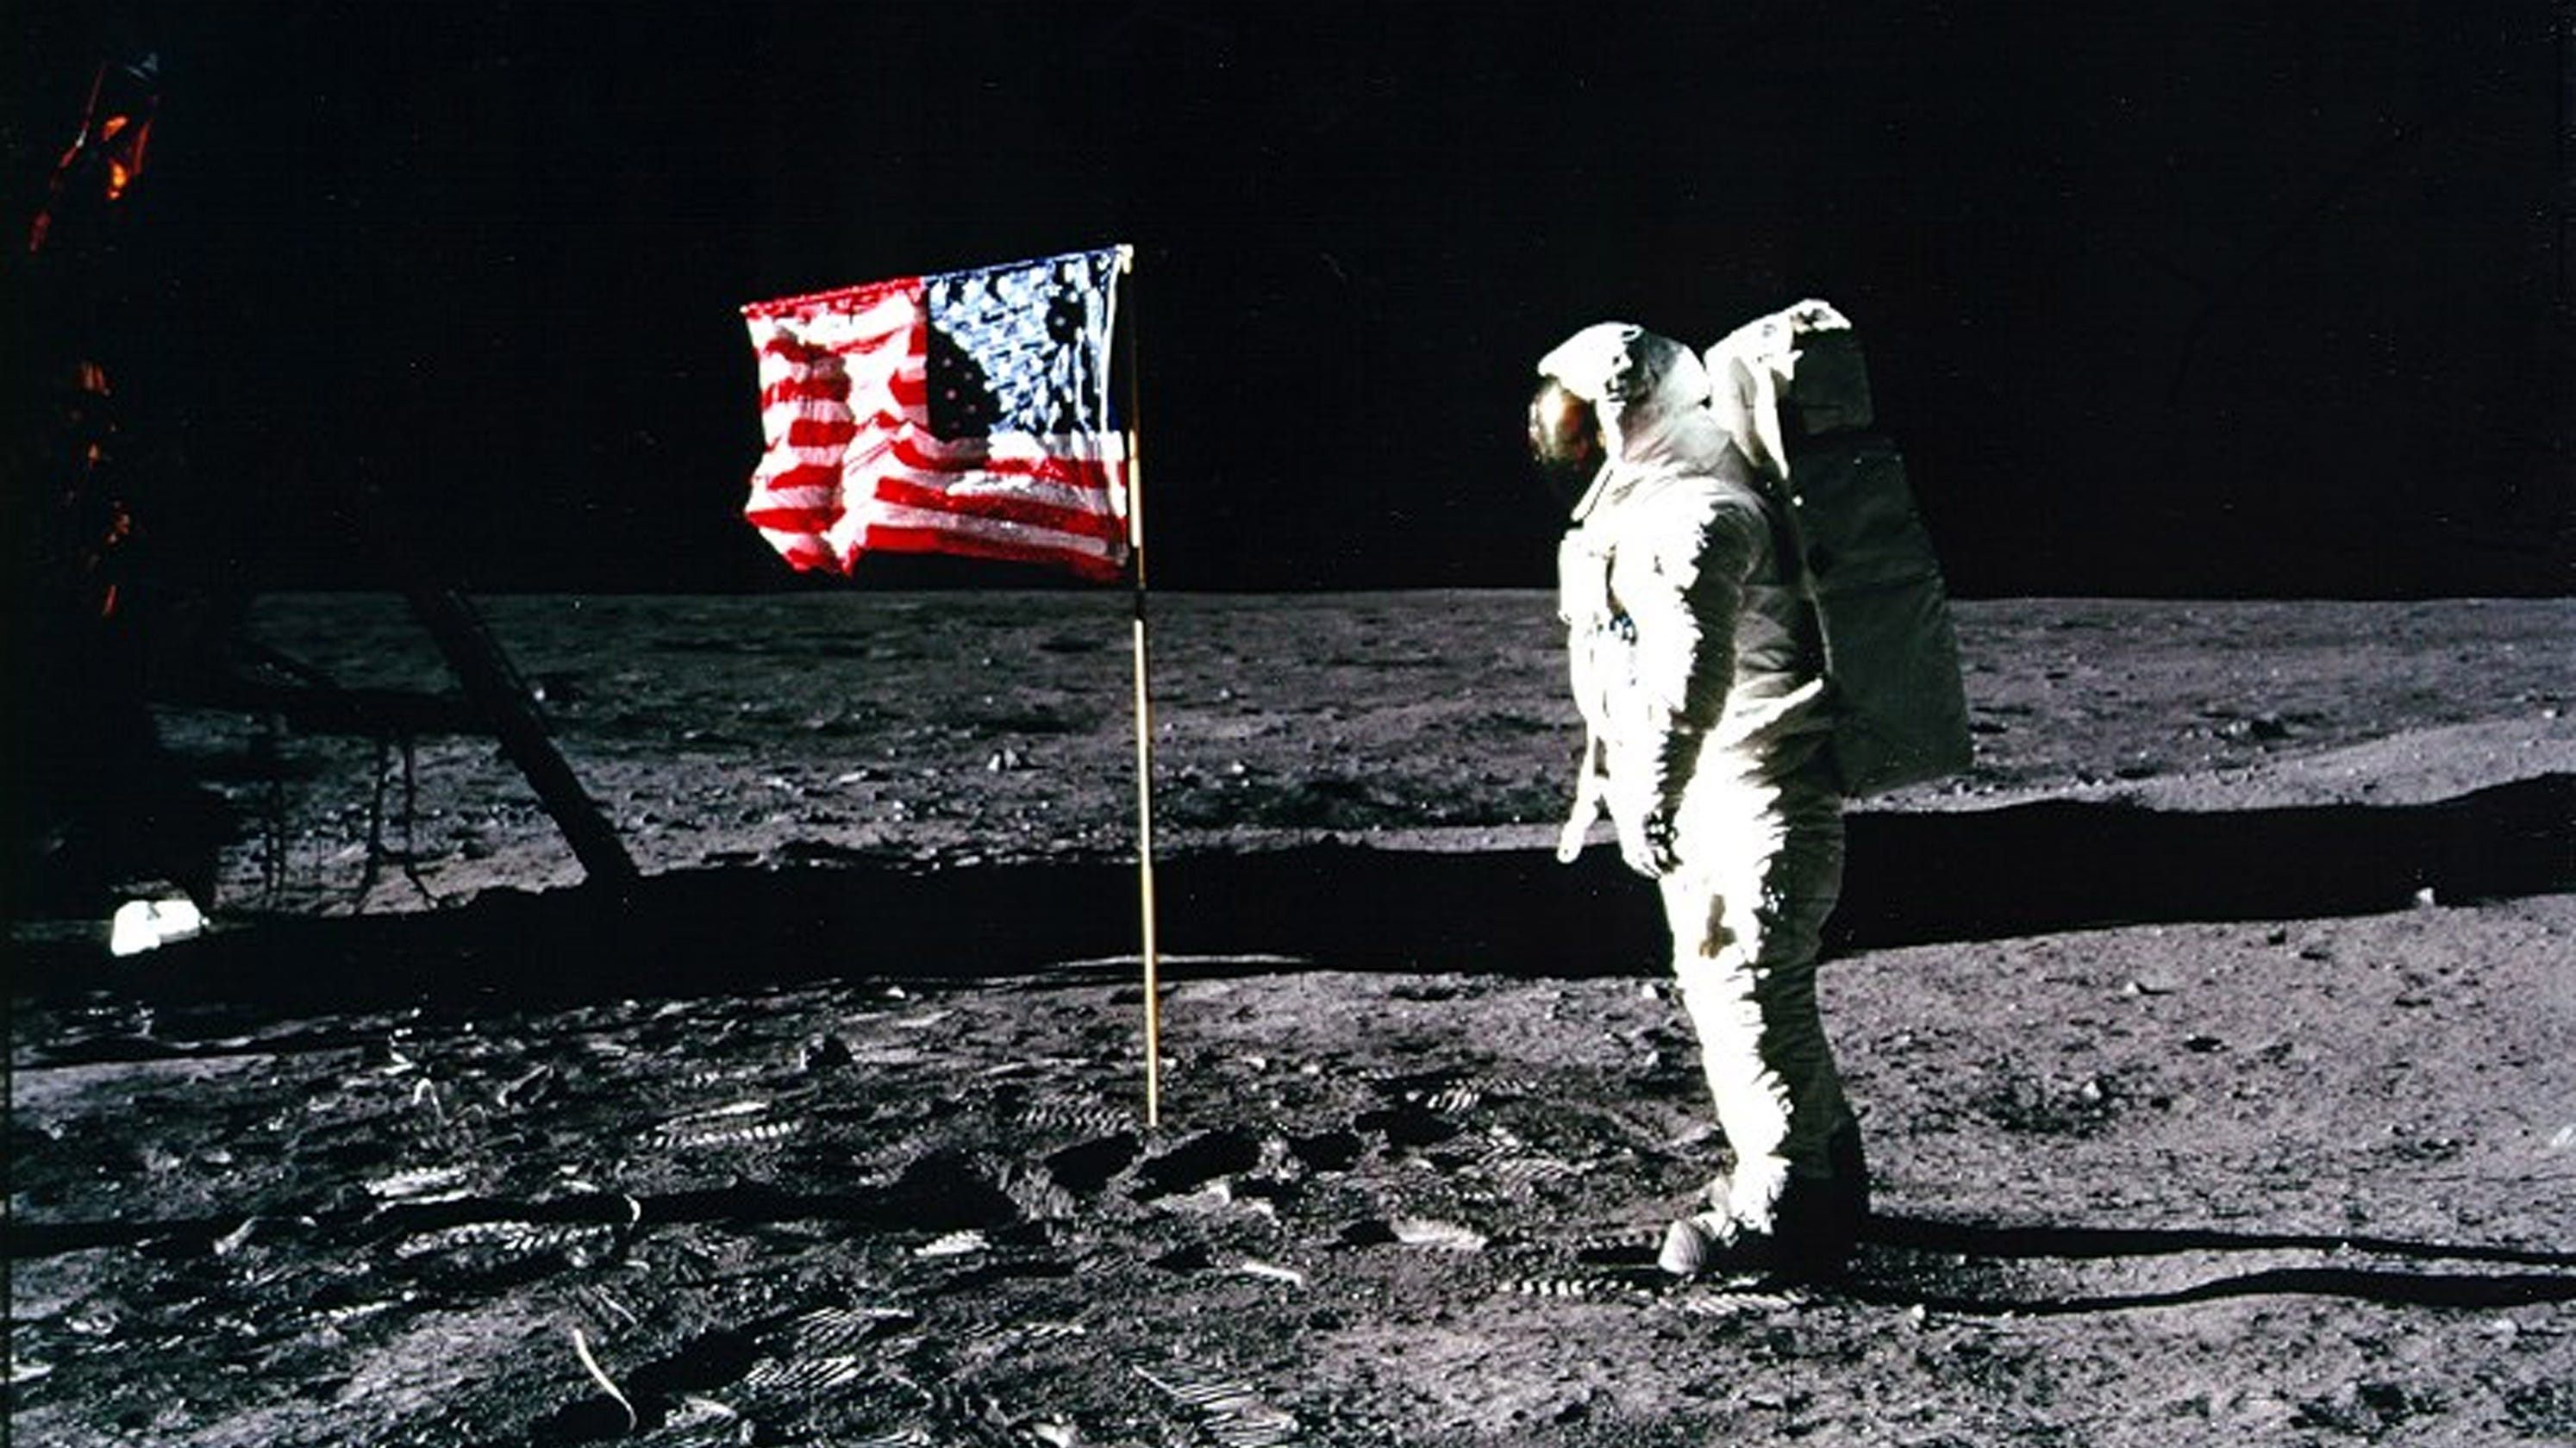 essay on man's first landing on the moon